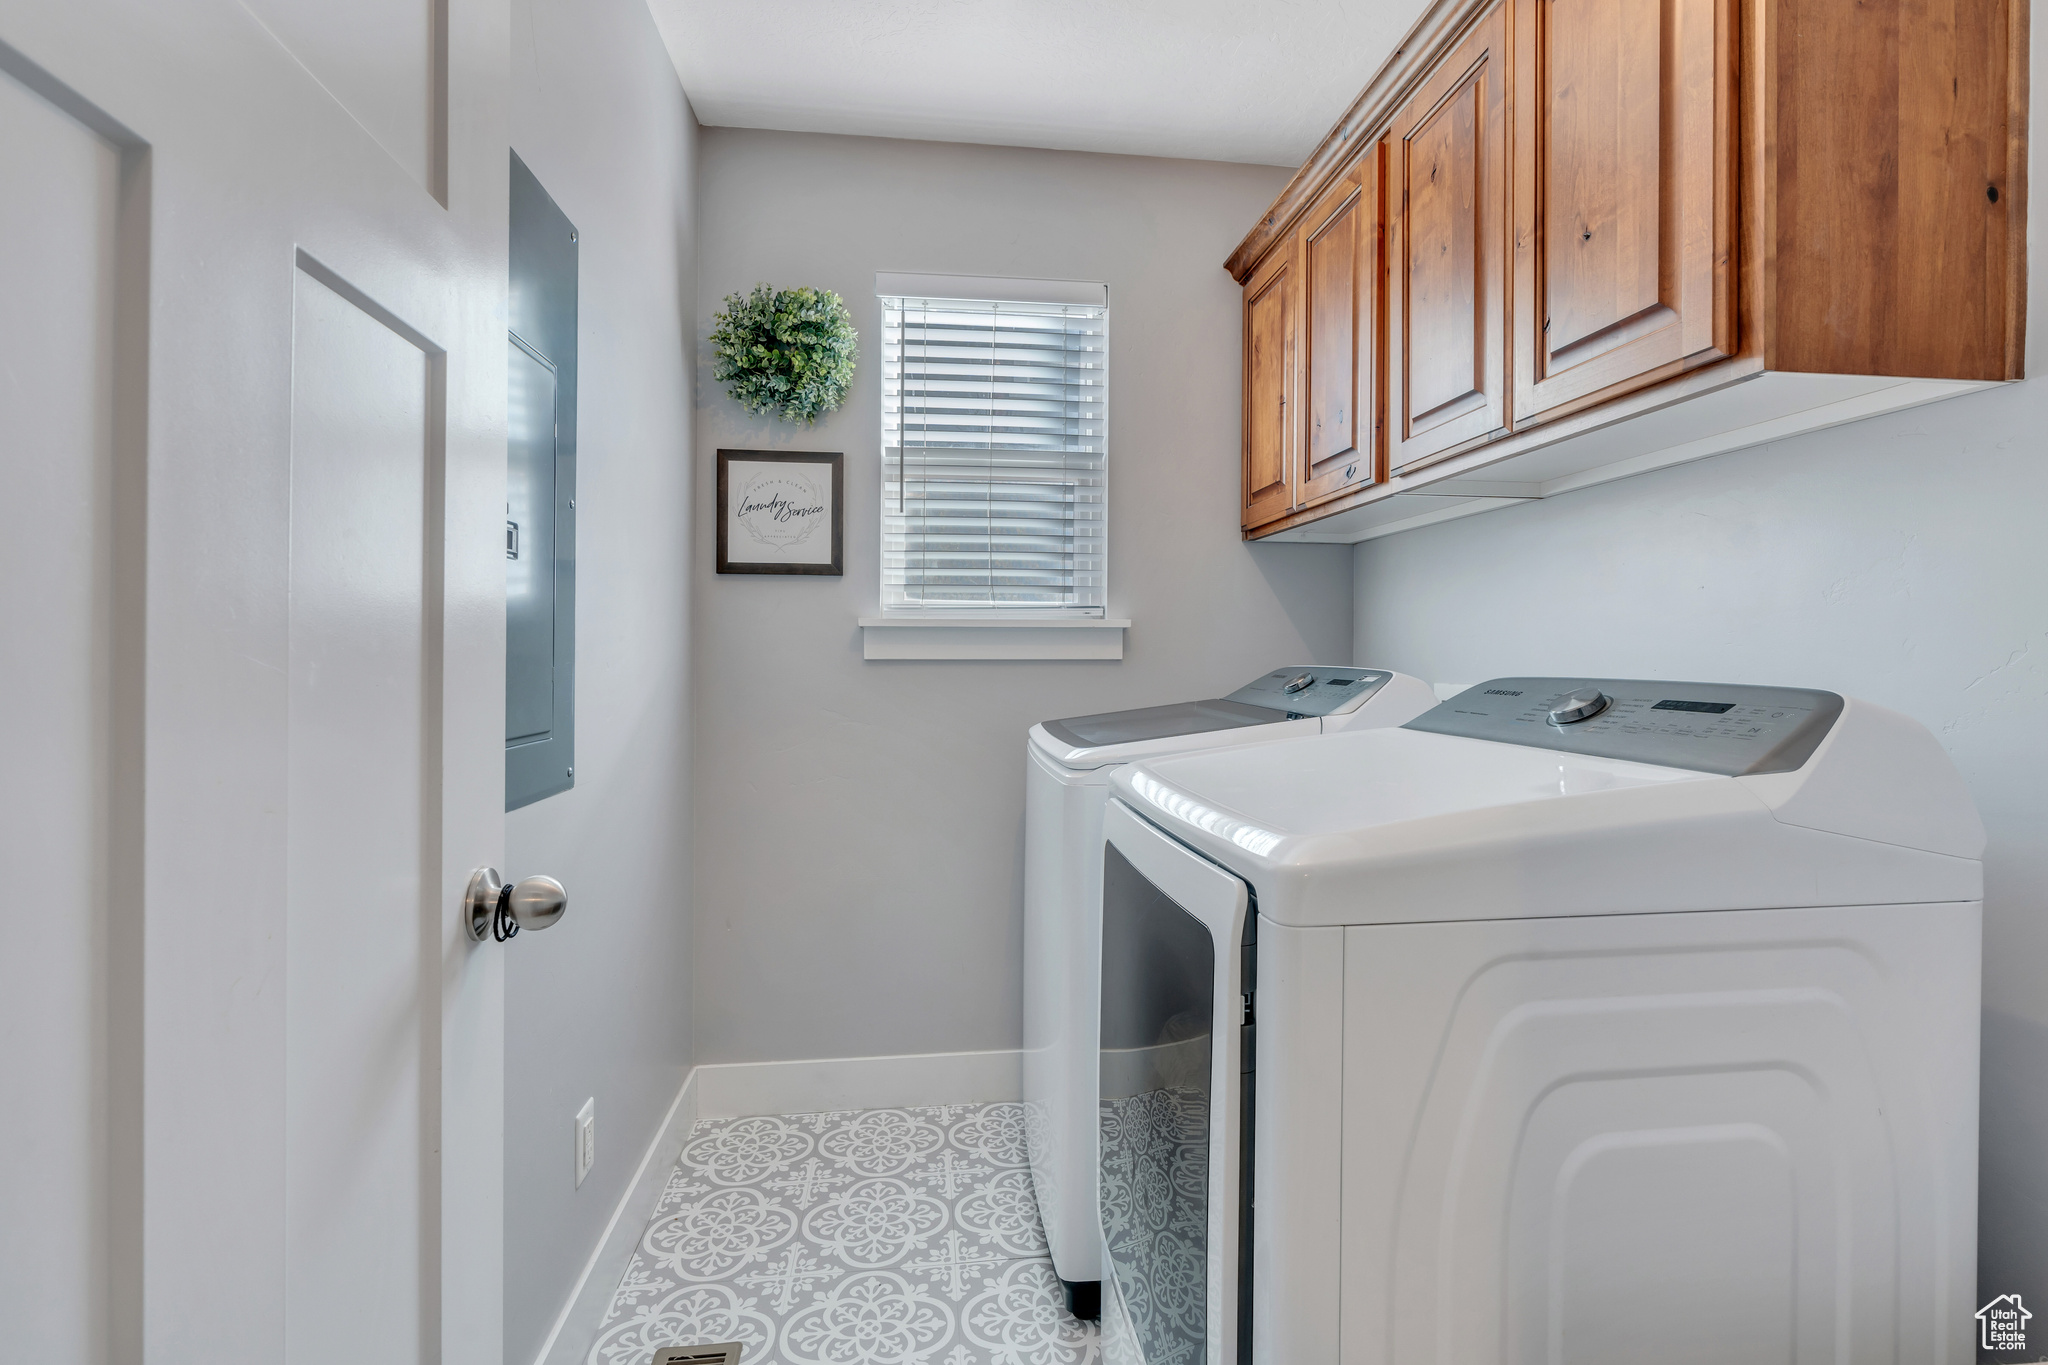 Laundry area featuring washer and clothes dryer, cabinets, and light tile floors